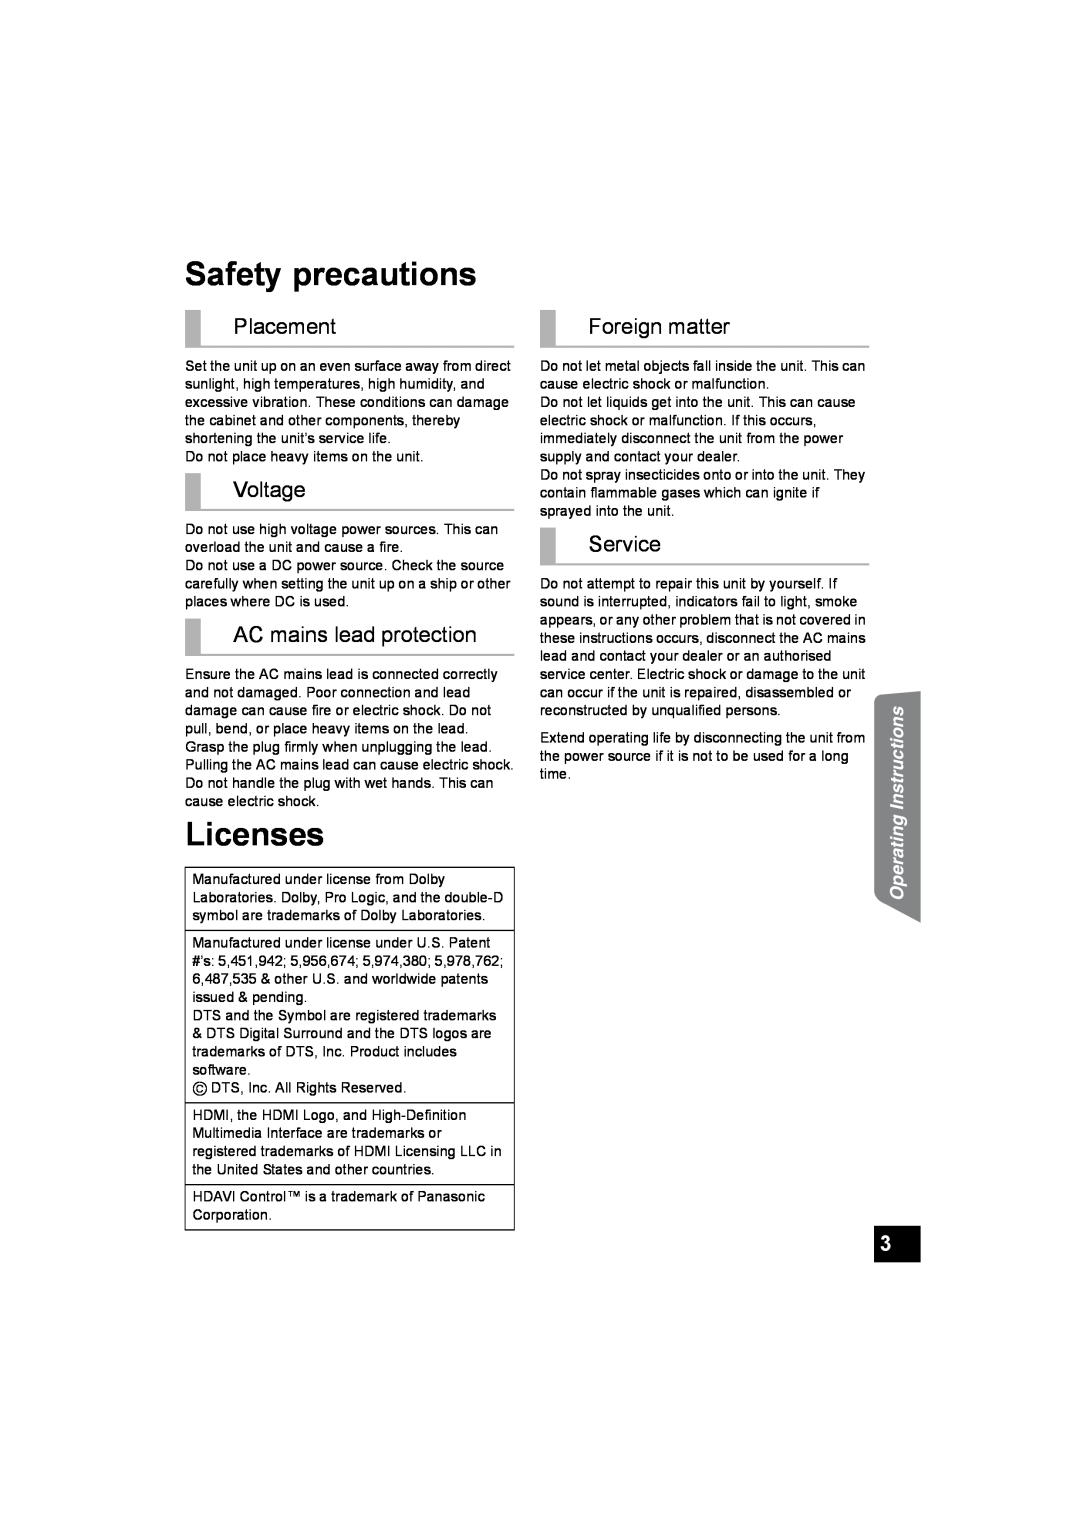 Panasonic SC-HTB500 Safety precautions, Licenses, Placement, Voltage, AC mains lead protection, Foreign matter, Service 